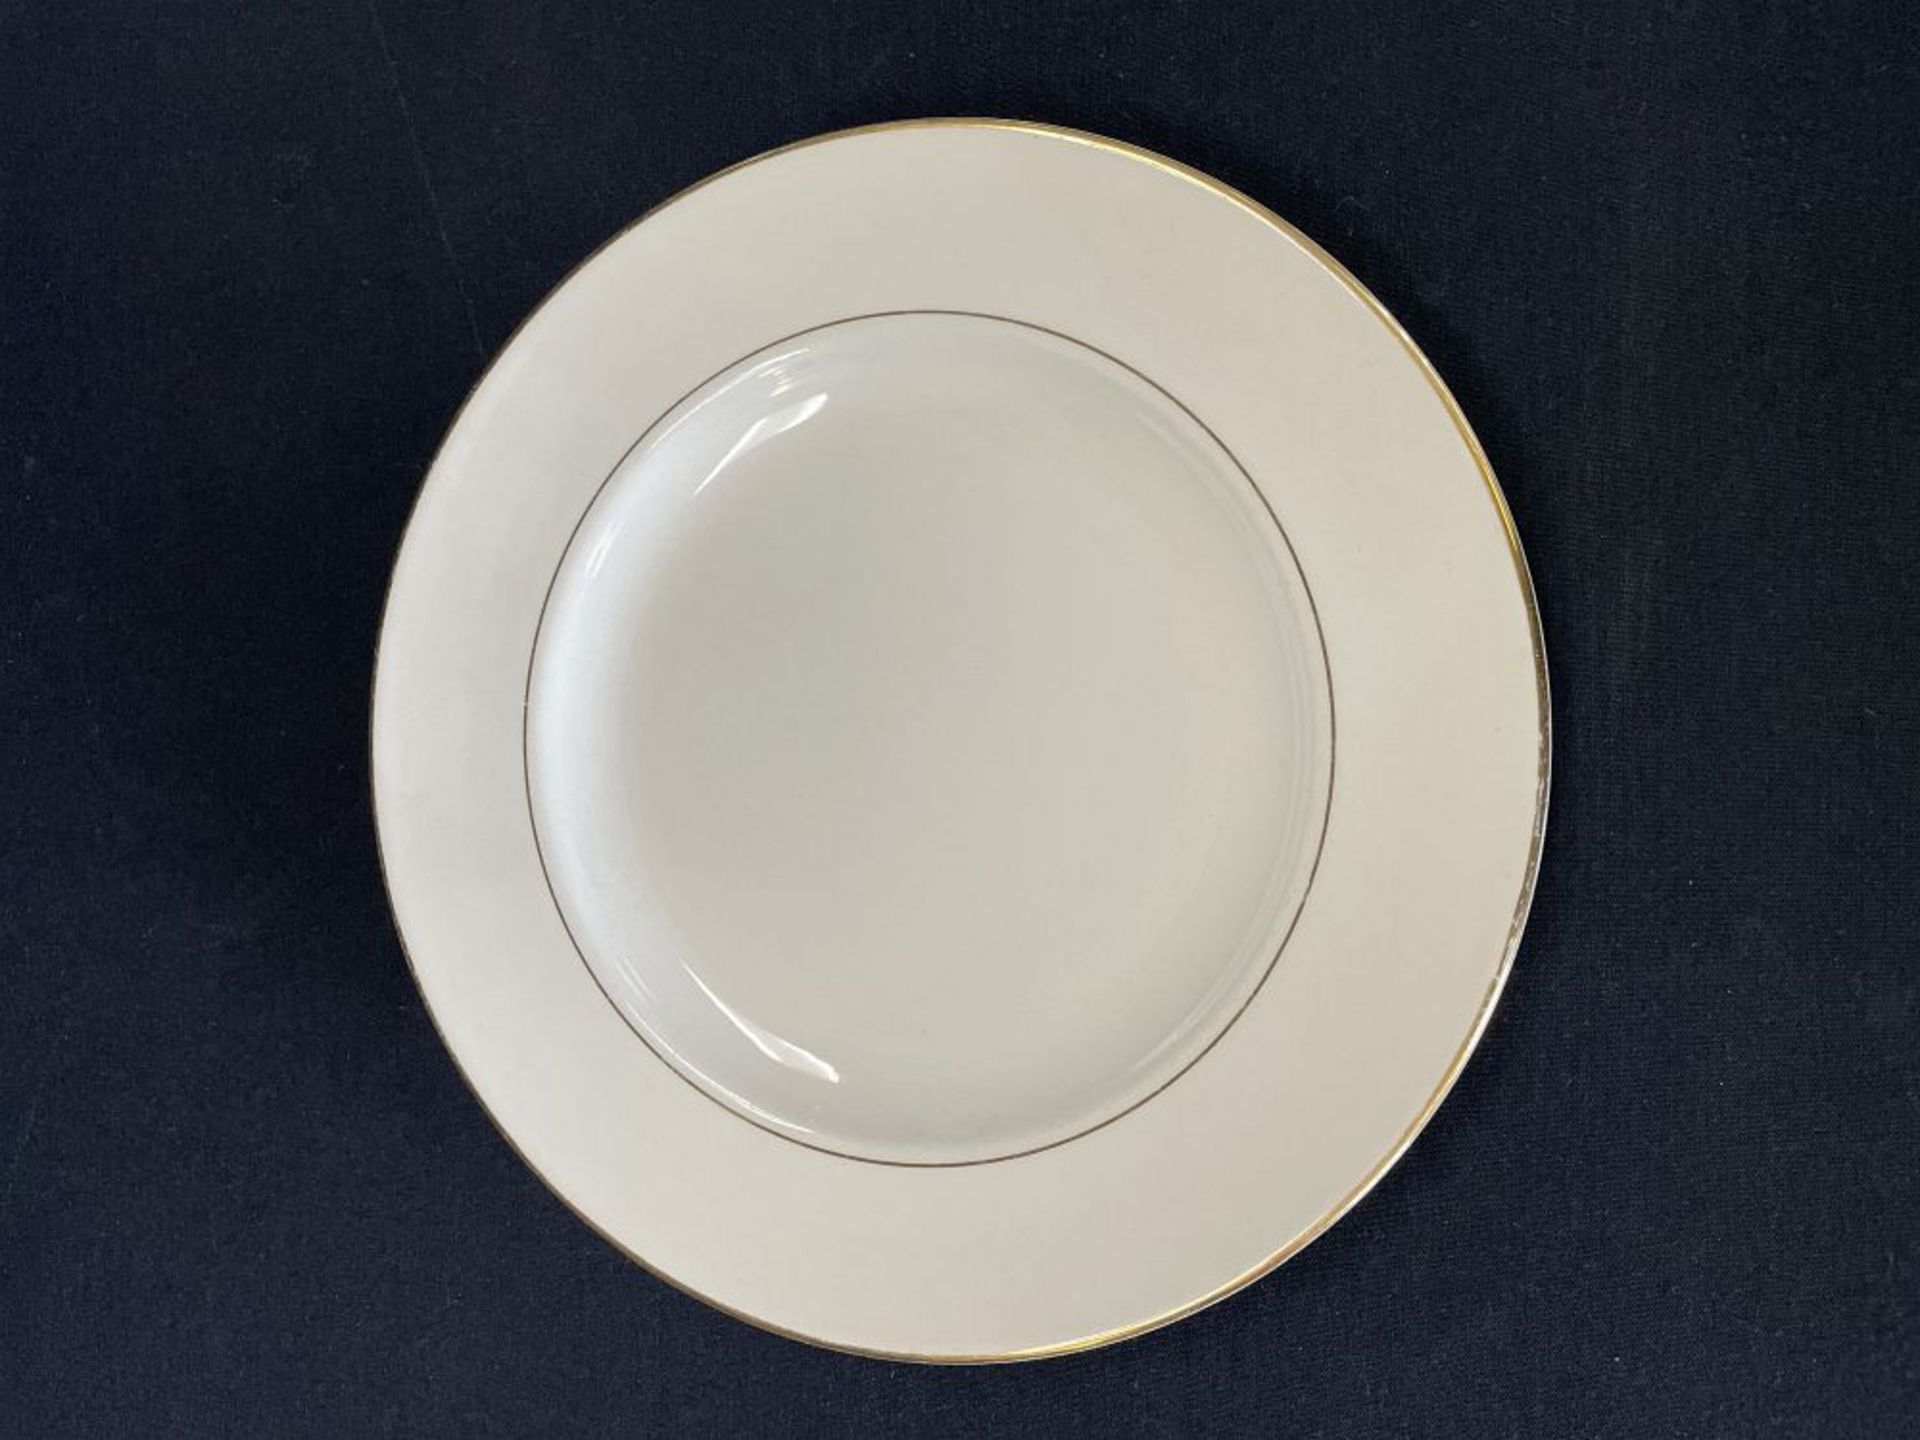 10" Plate, Knowles